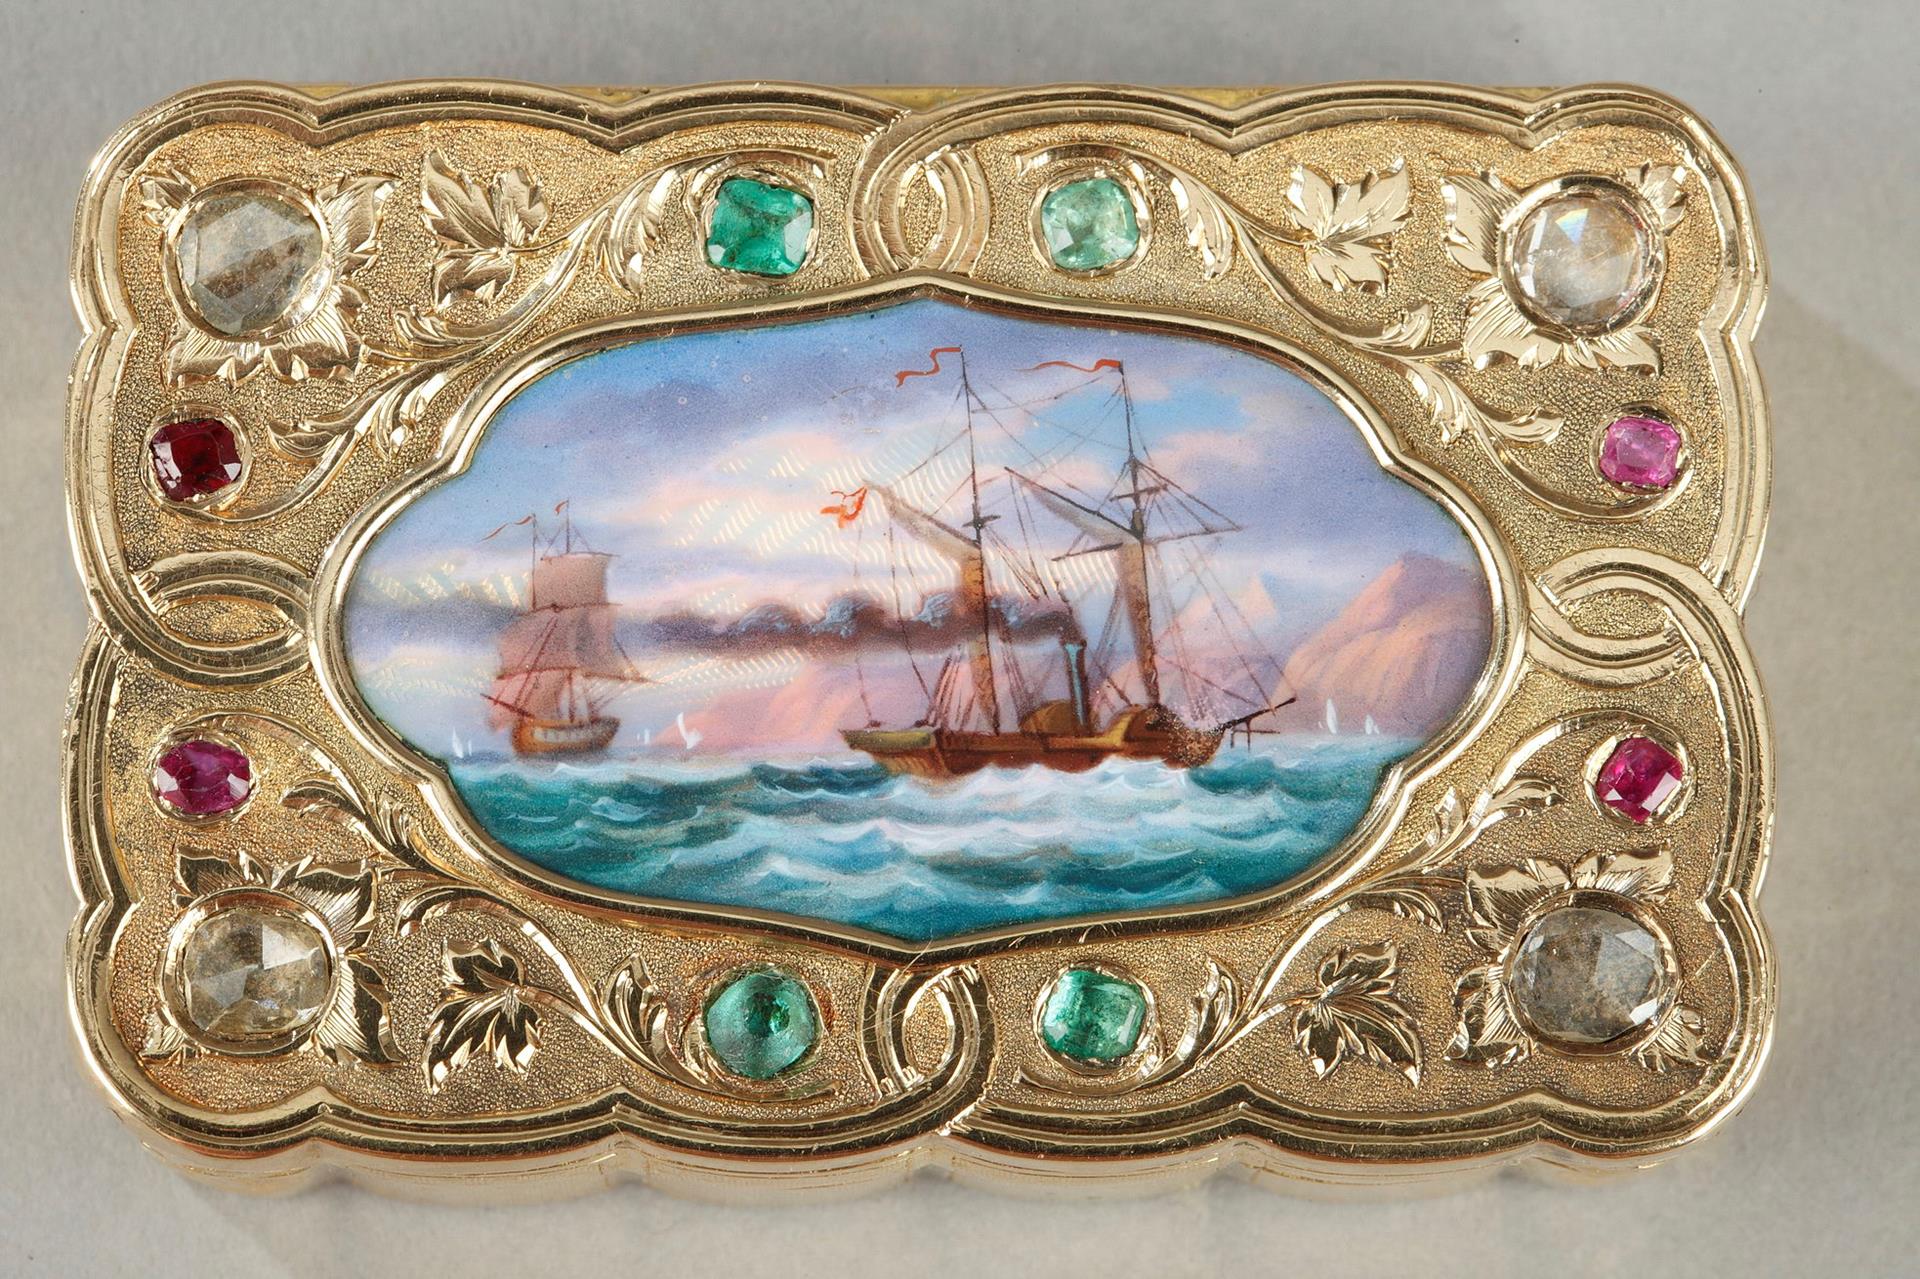 A SWISS ENAMELLED GOLD SNUFF-BOX FOR THE ORIENTAL MARKET. <br>Circa 1820-1830